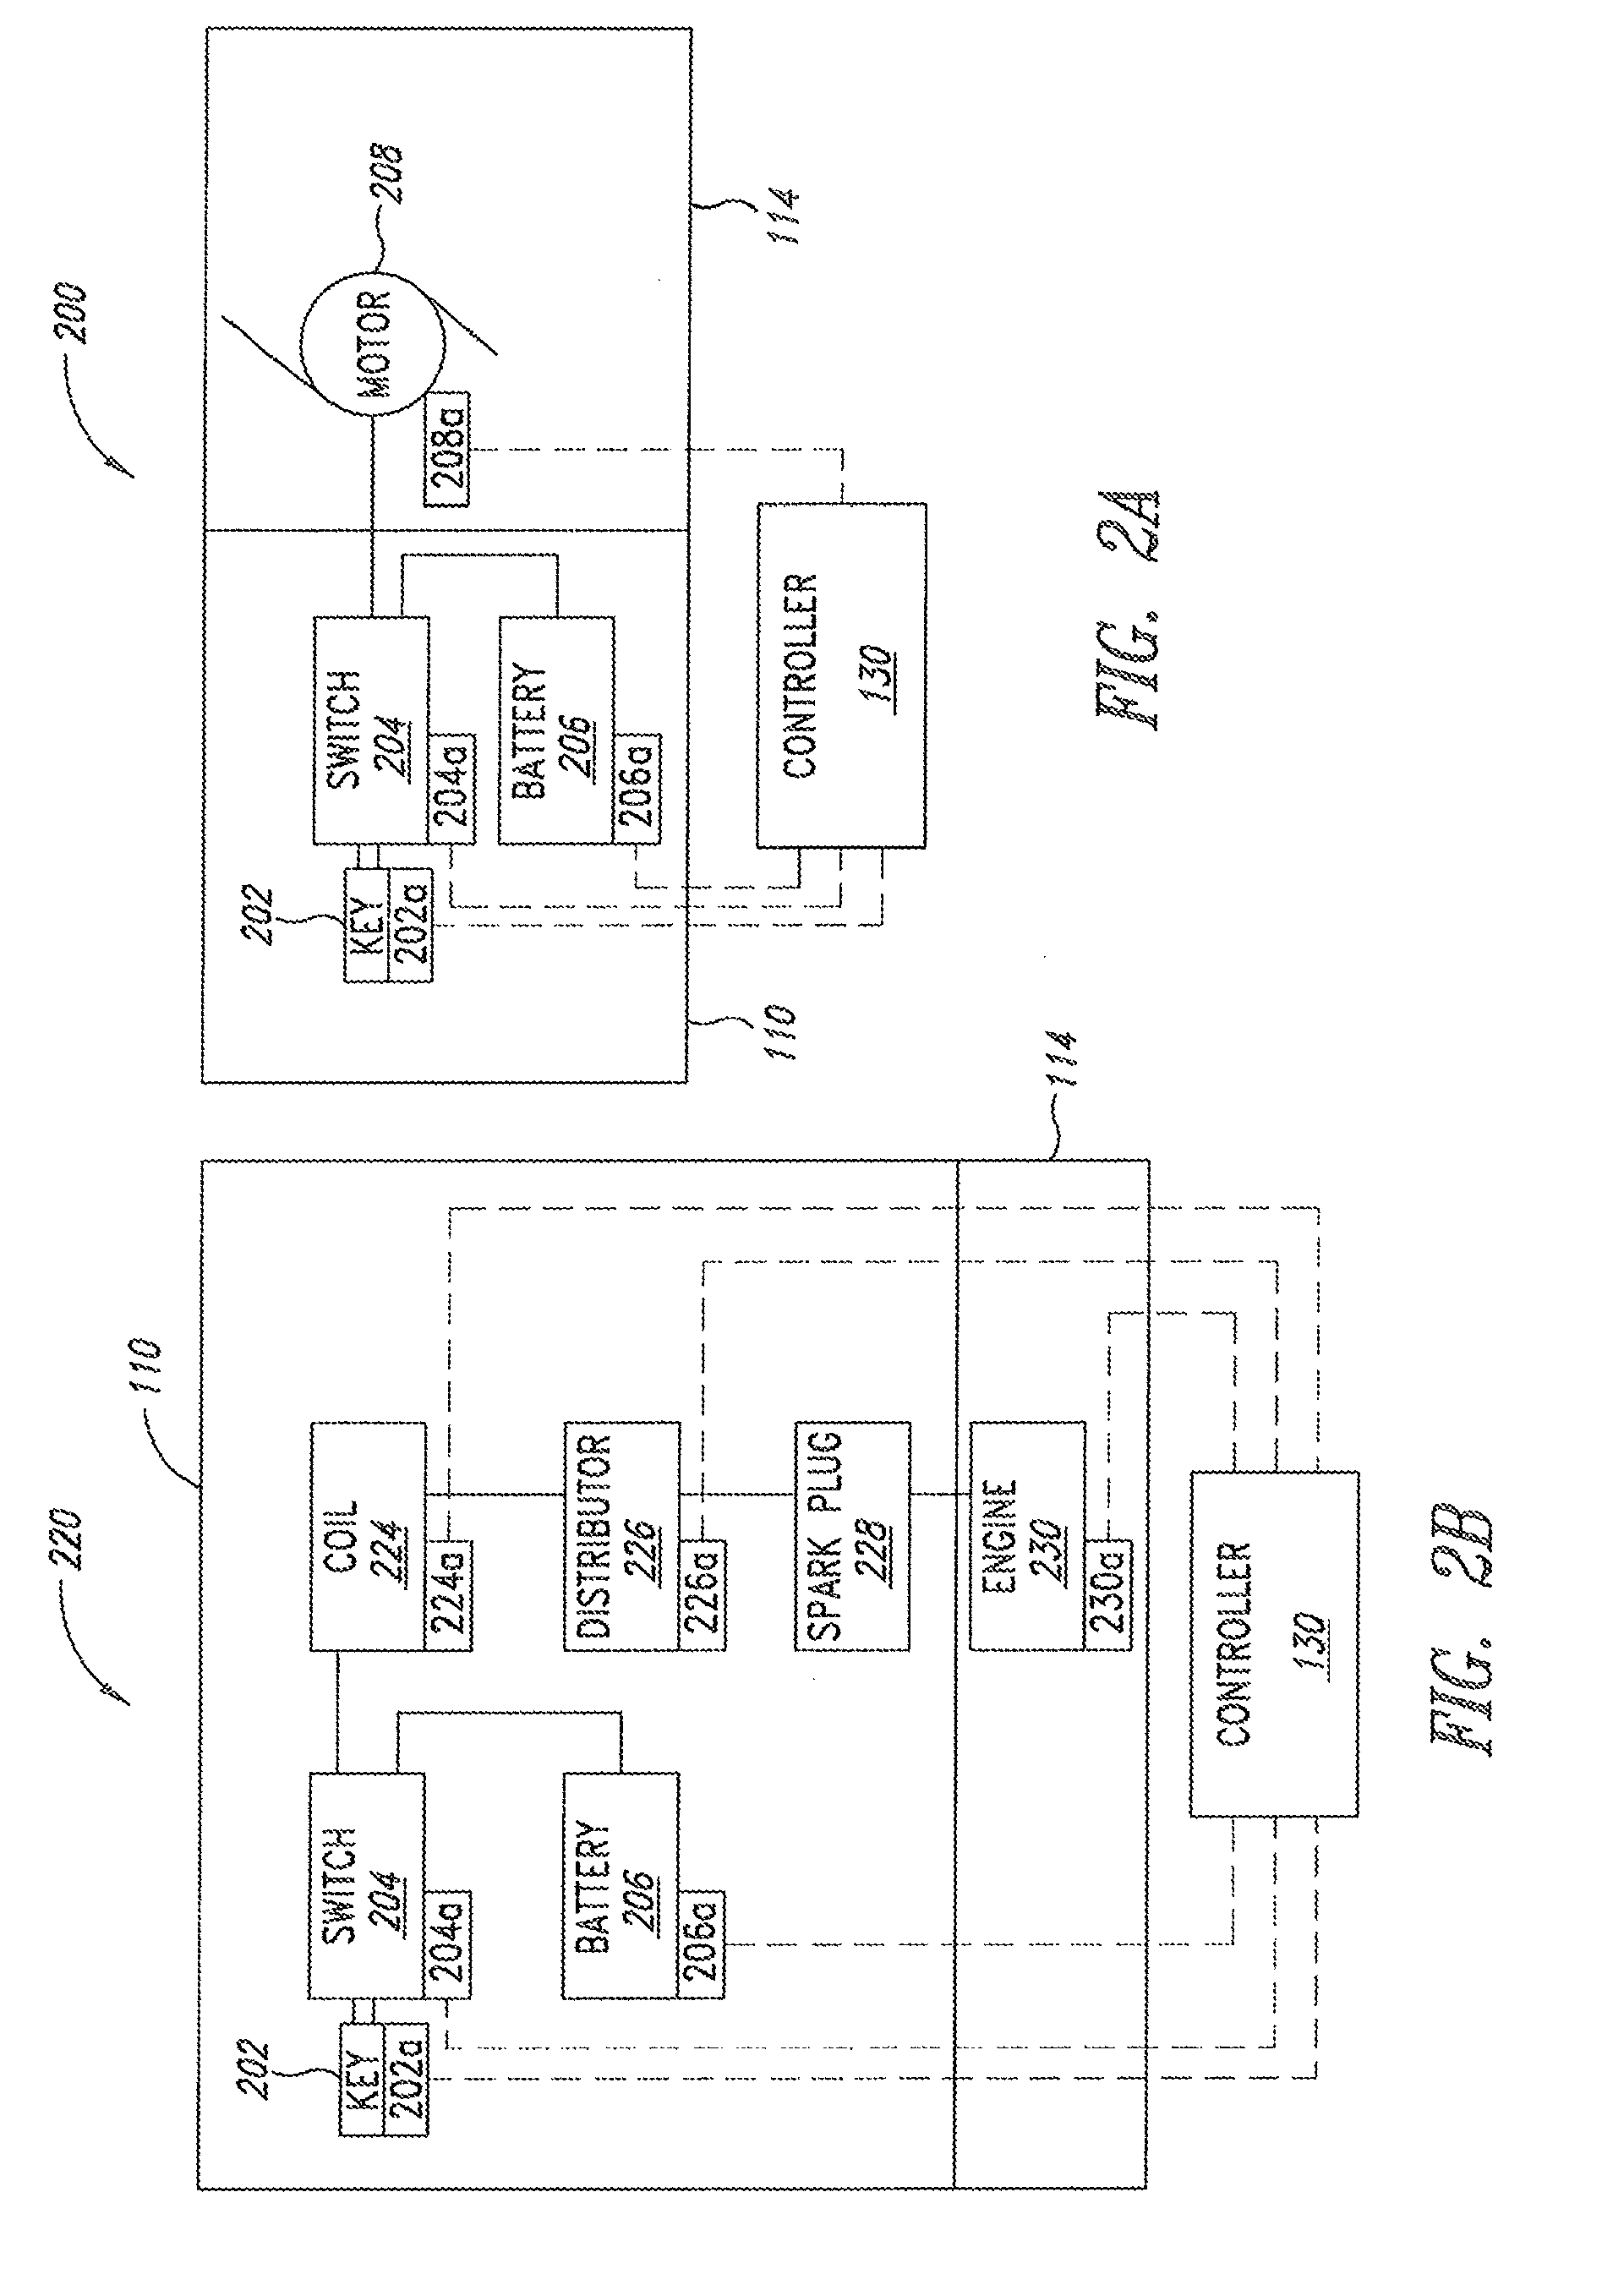 Apparatus, system, and method for authentication of vehicular components